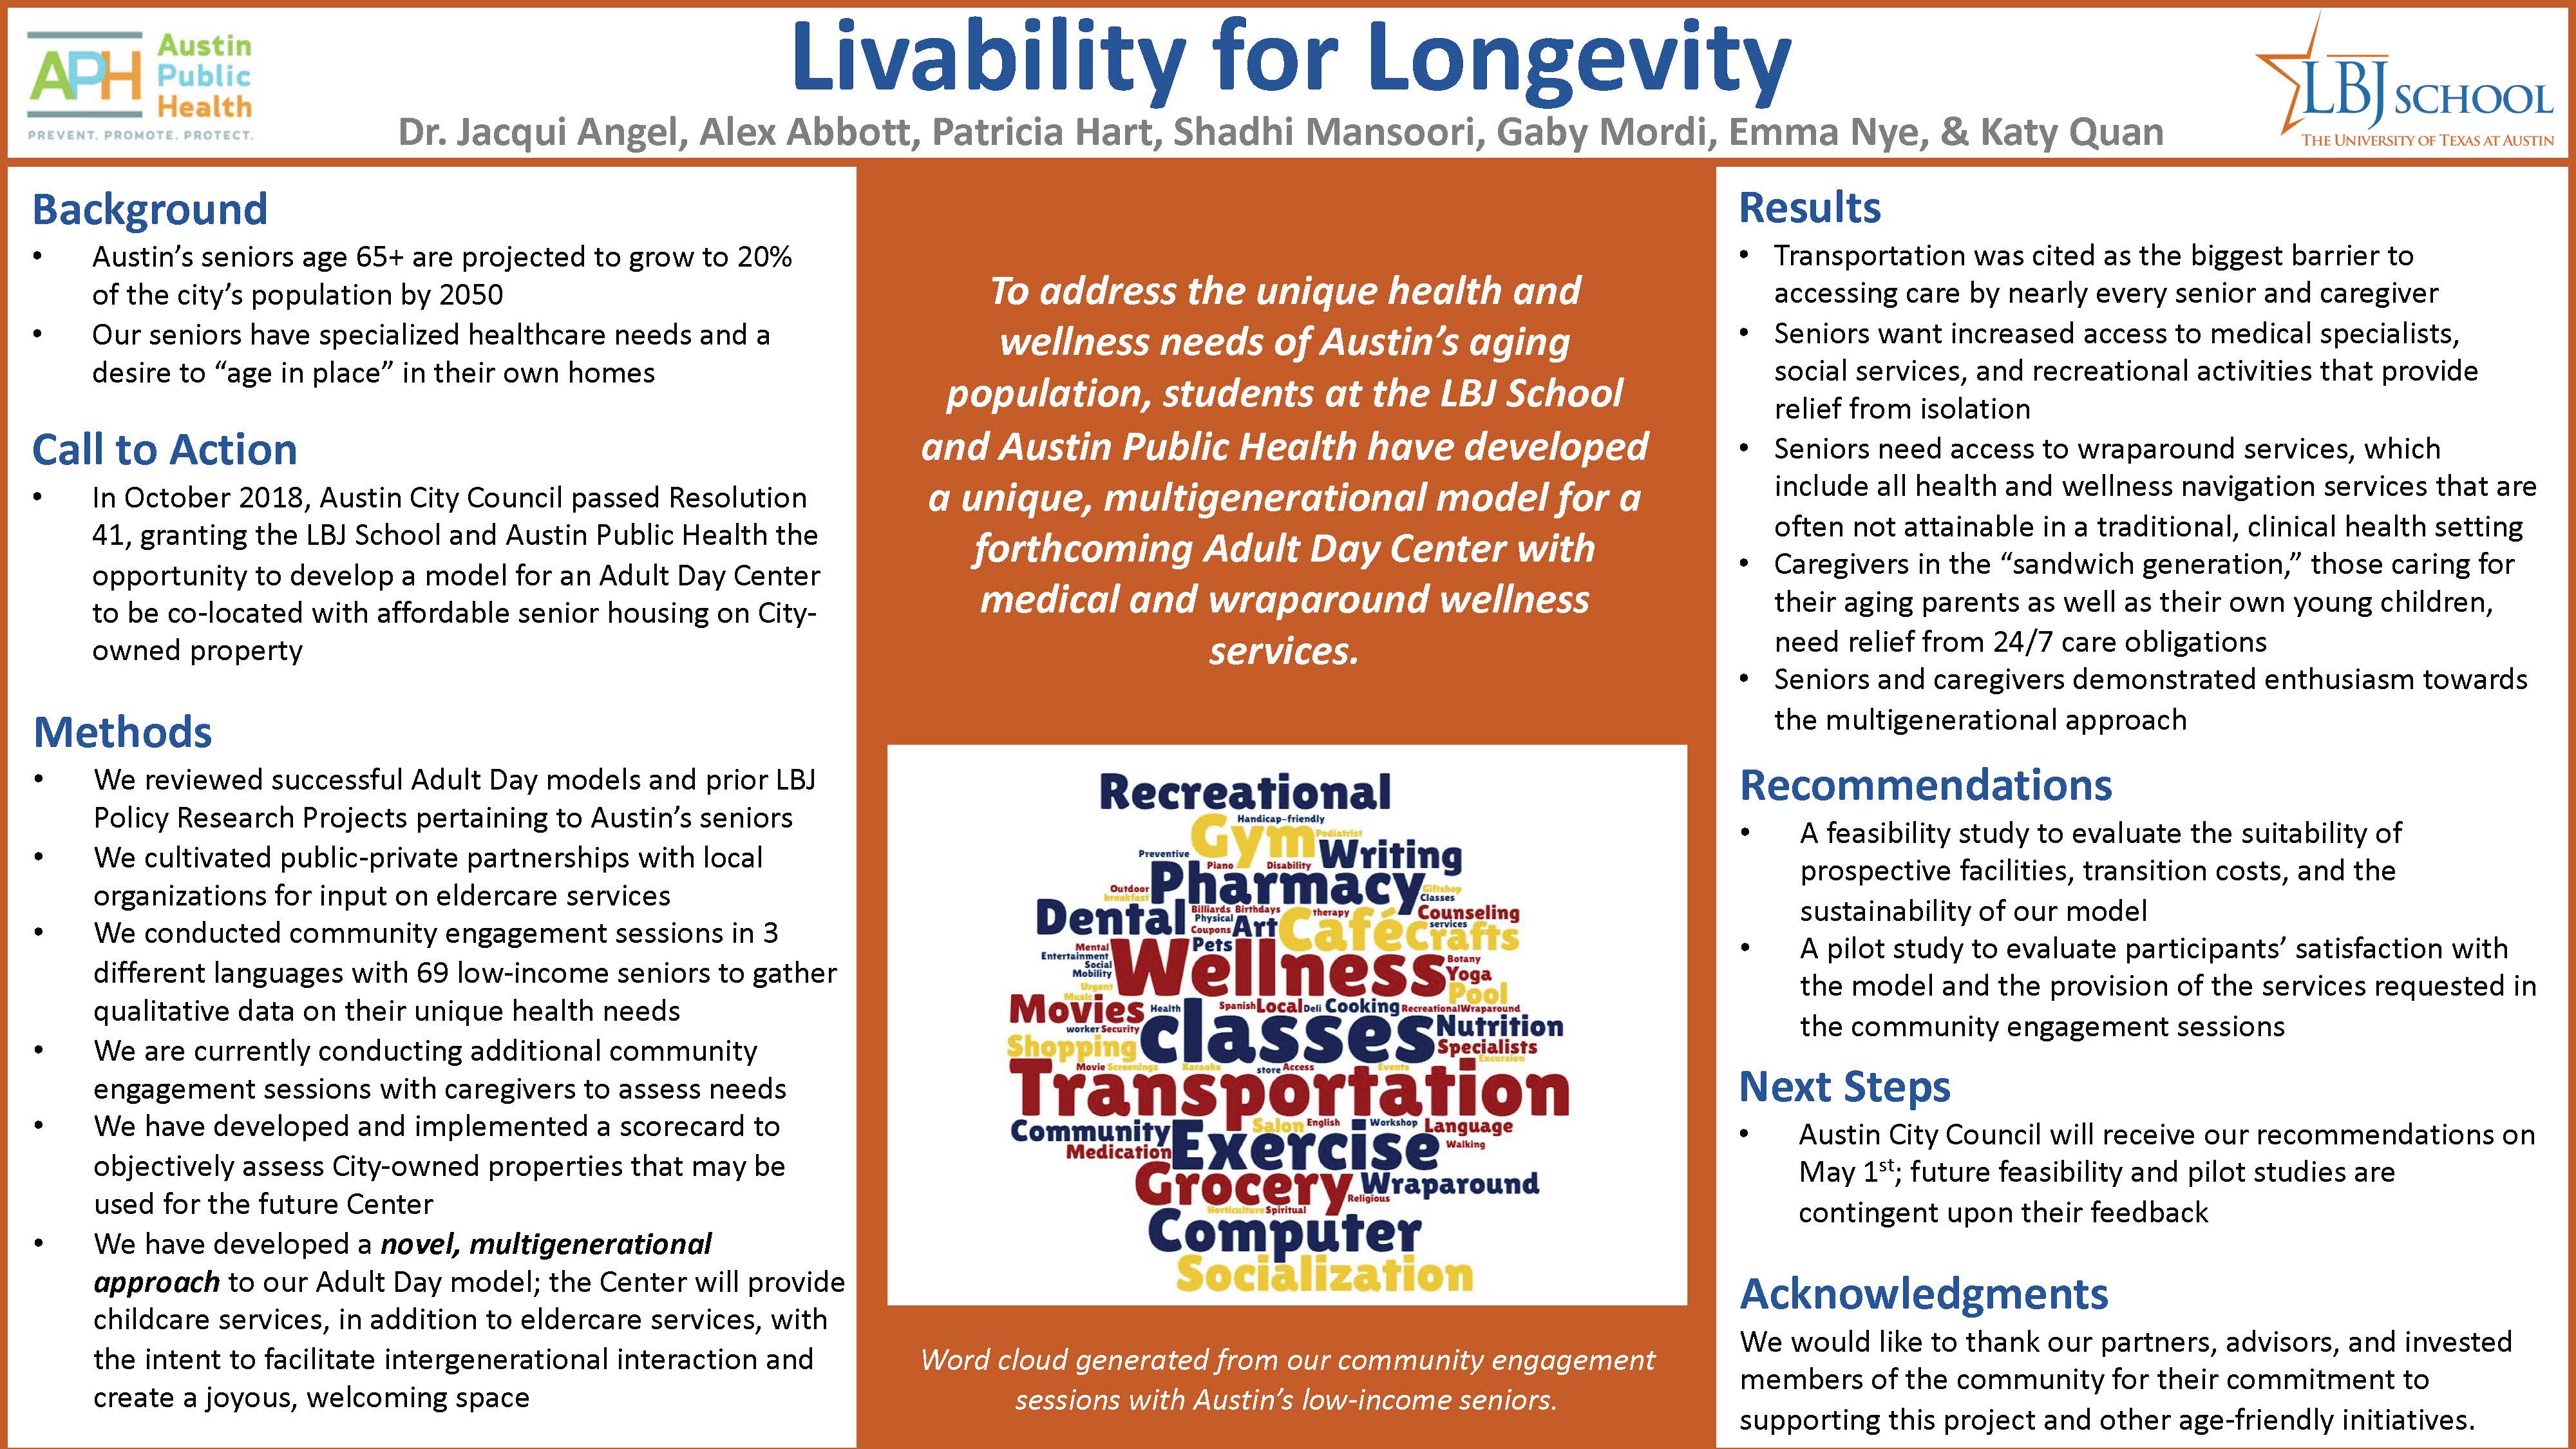 Innovation Bound 2019 research poster: Livability for Longevity